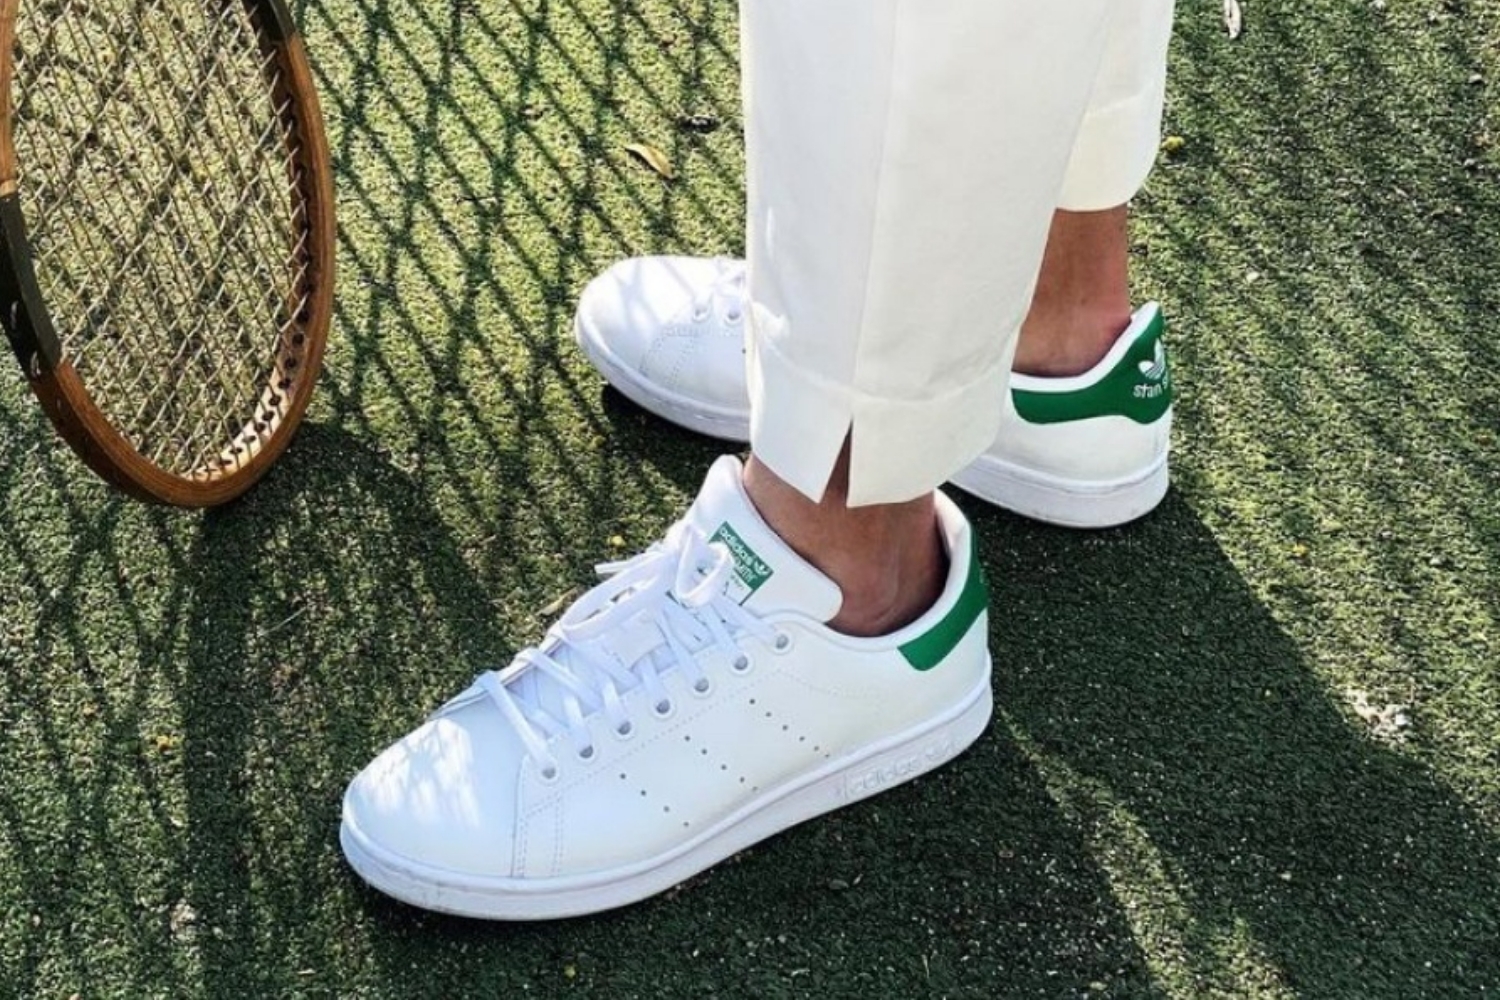 The History of the adidas Stan Smith